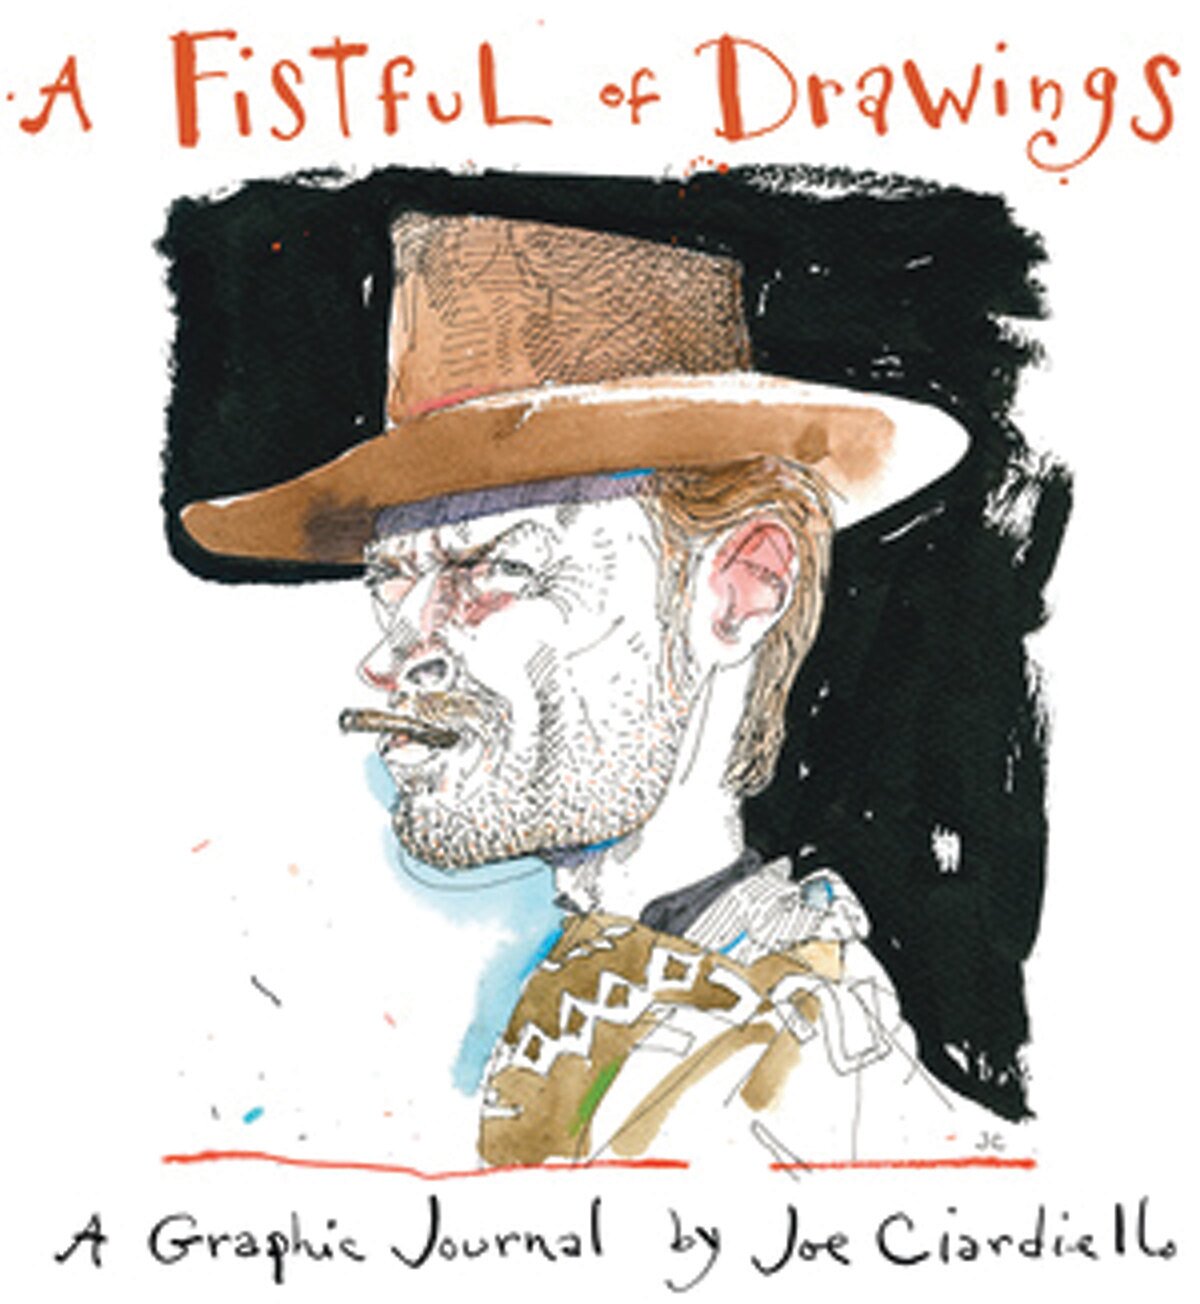 “A Fistful of Drawings” was published in 2019.